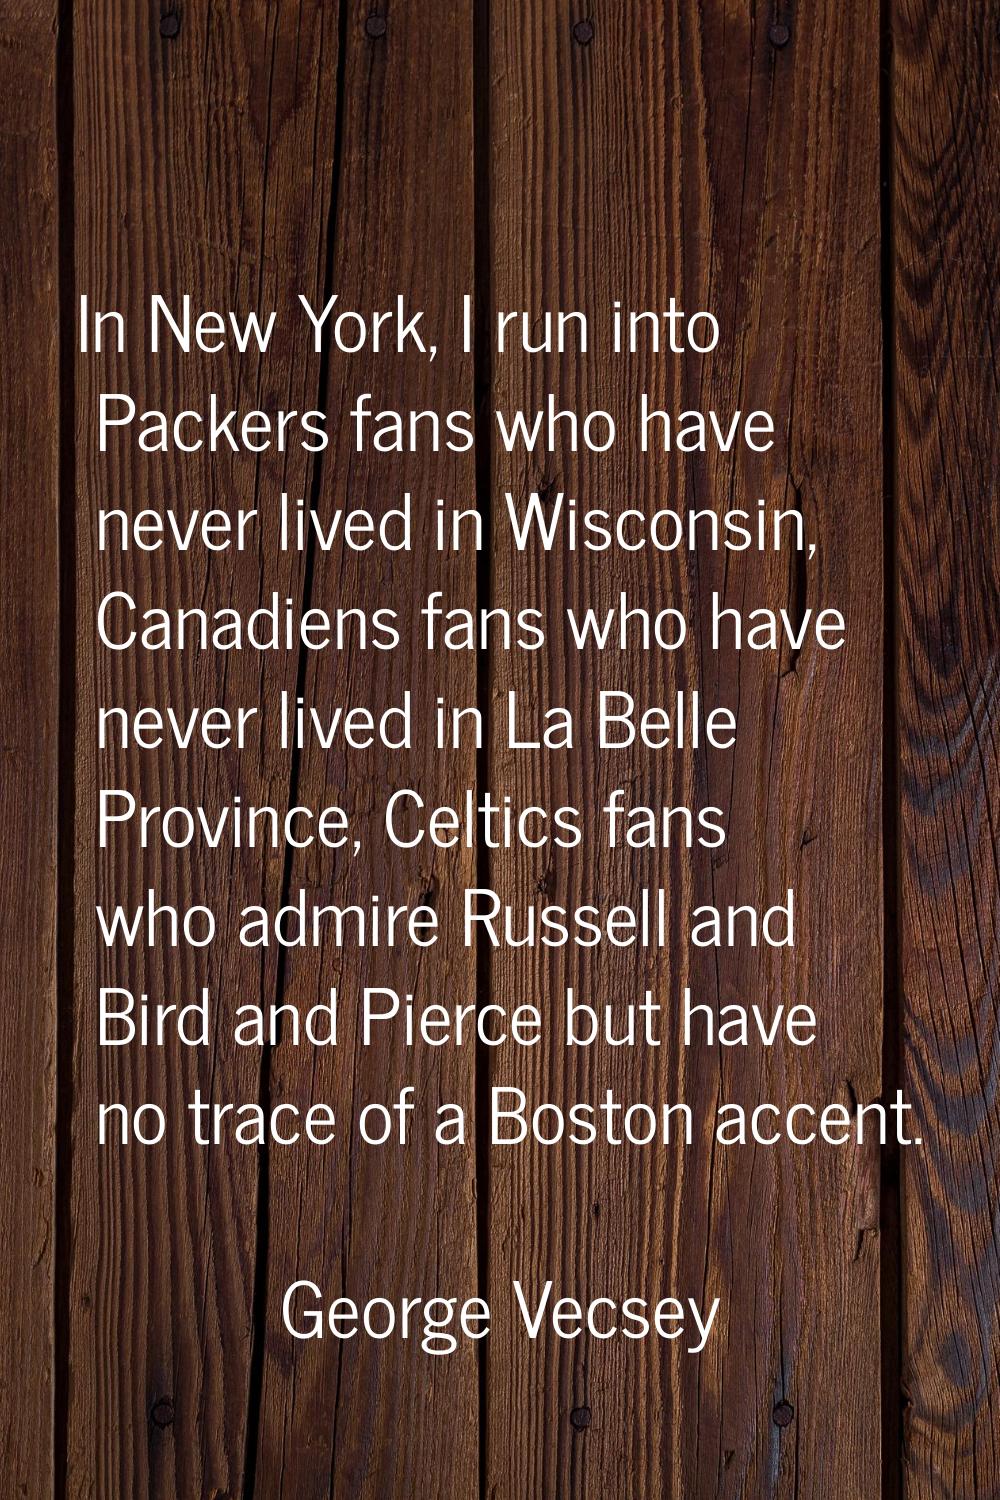 In New York, I run into Packers fans who have never lived in Wisconsin, Canadiens fans who have nev